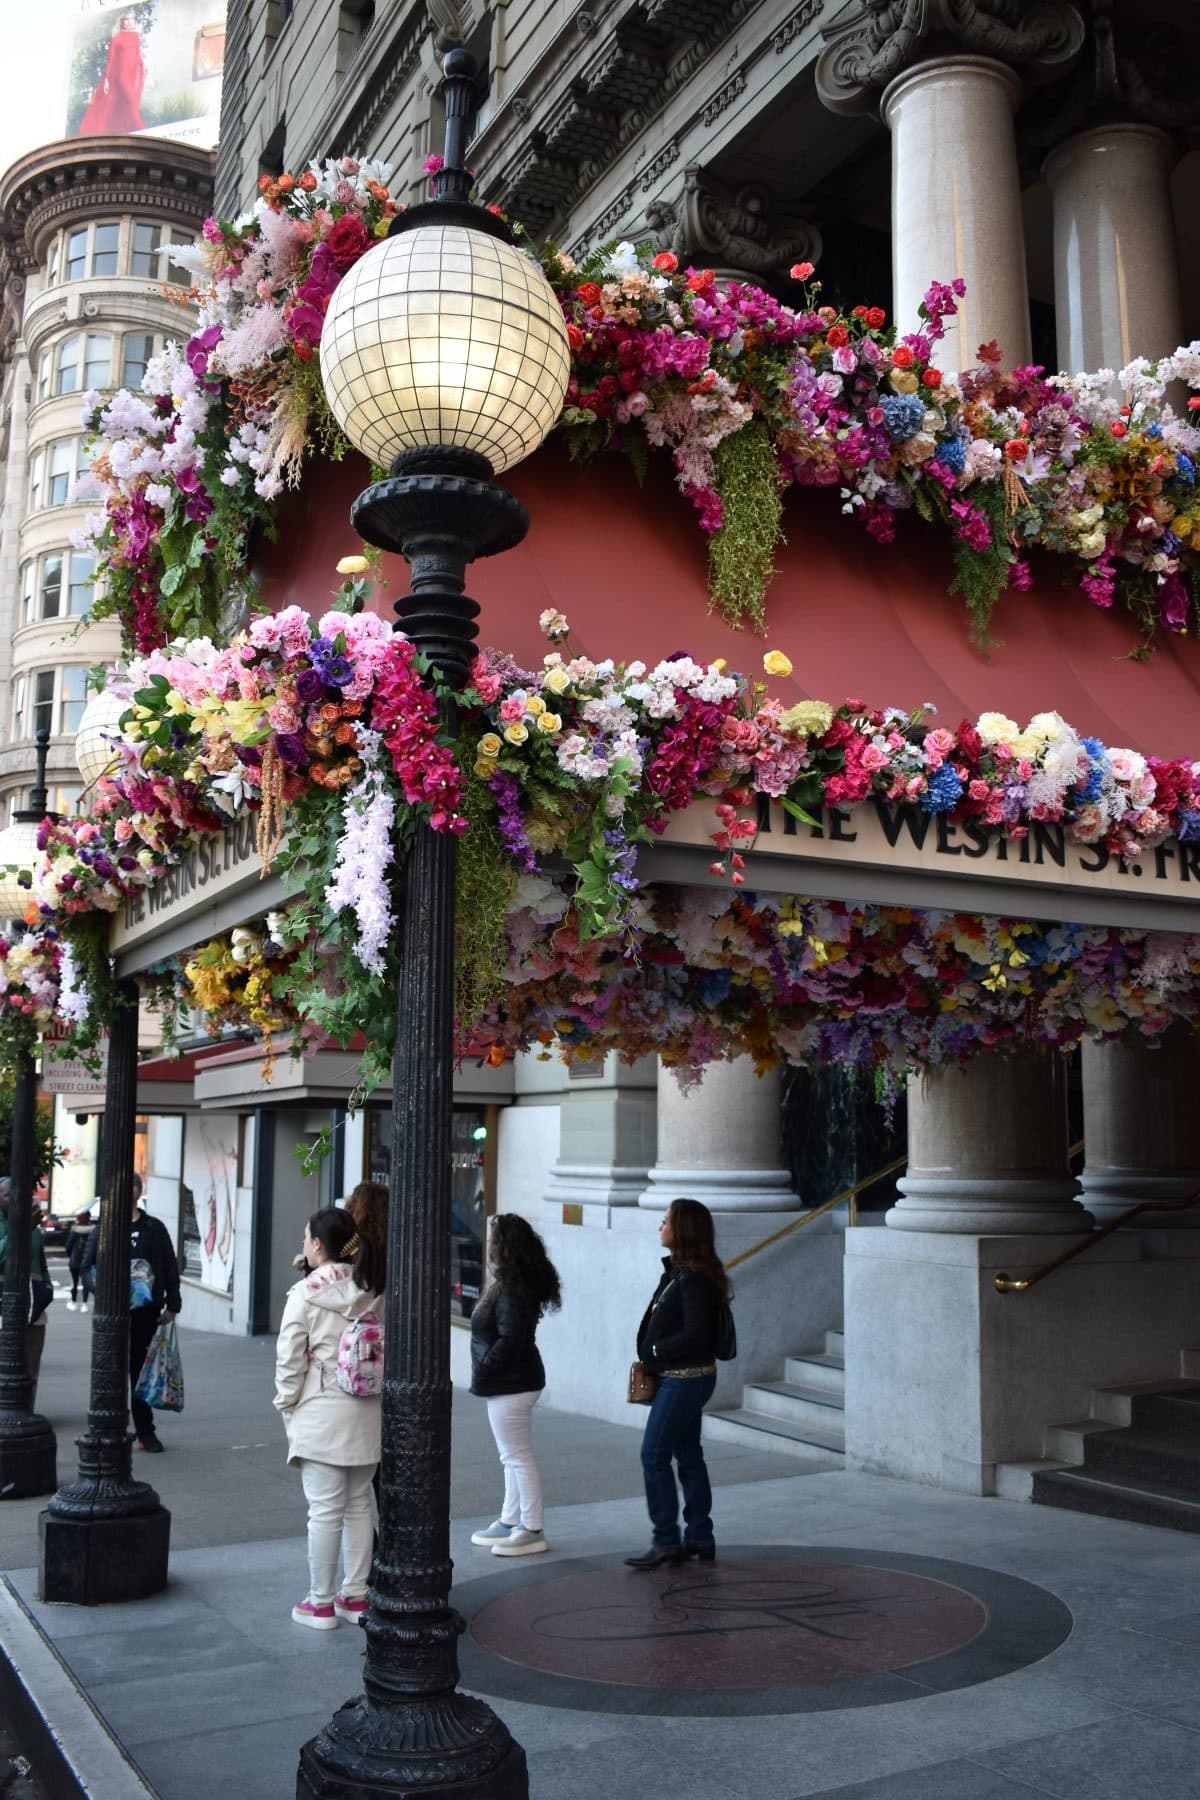 Flower display decorating exterior of Westin St. Francis hotel in San Francisco